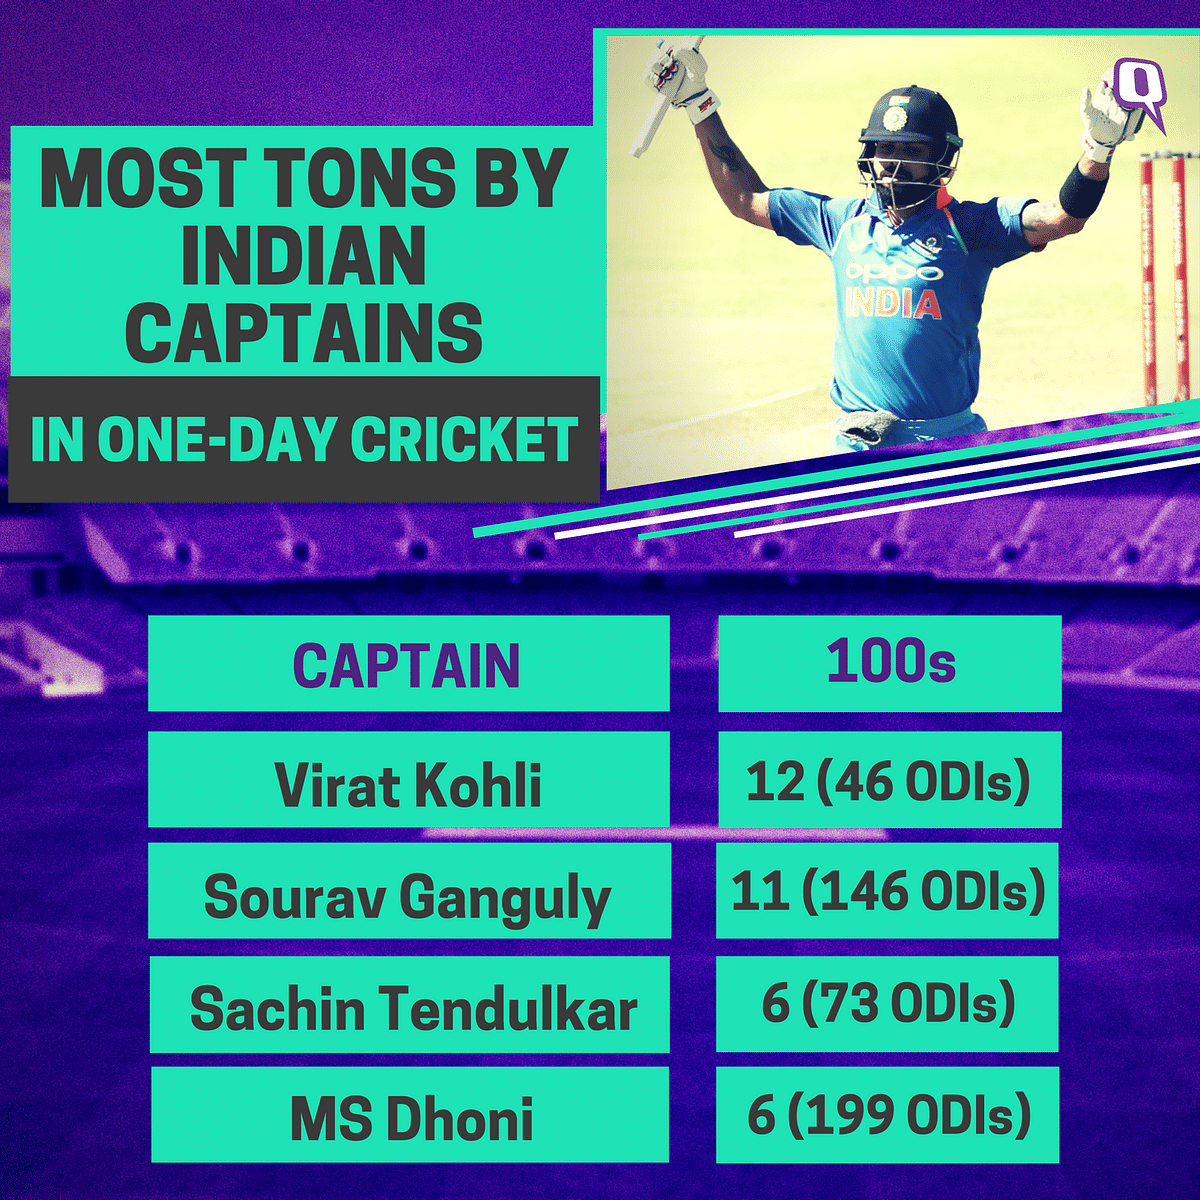 Virat Kohli set the record for the most ODI centuries by an Indian captain.